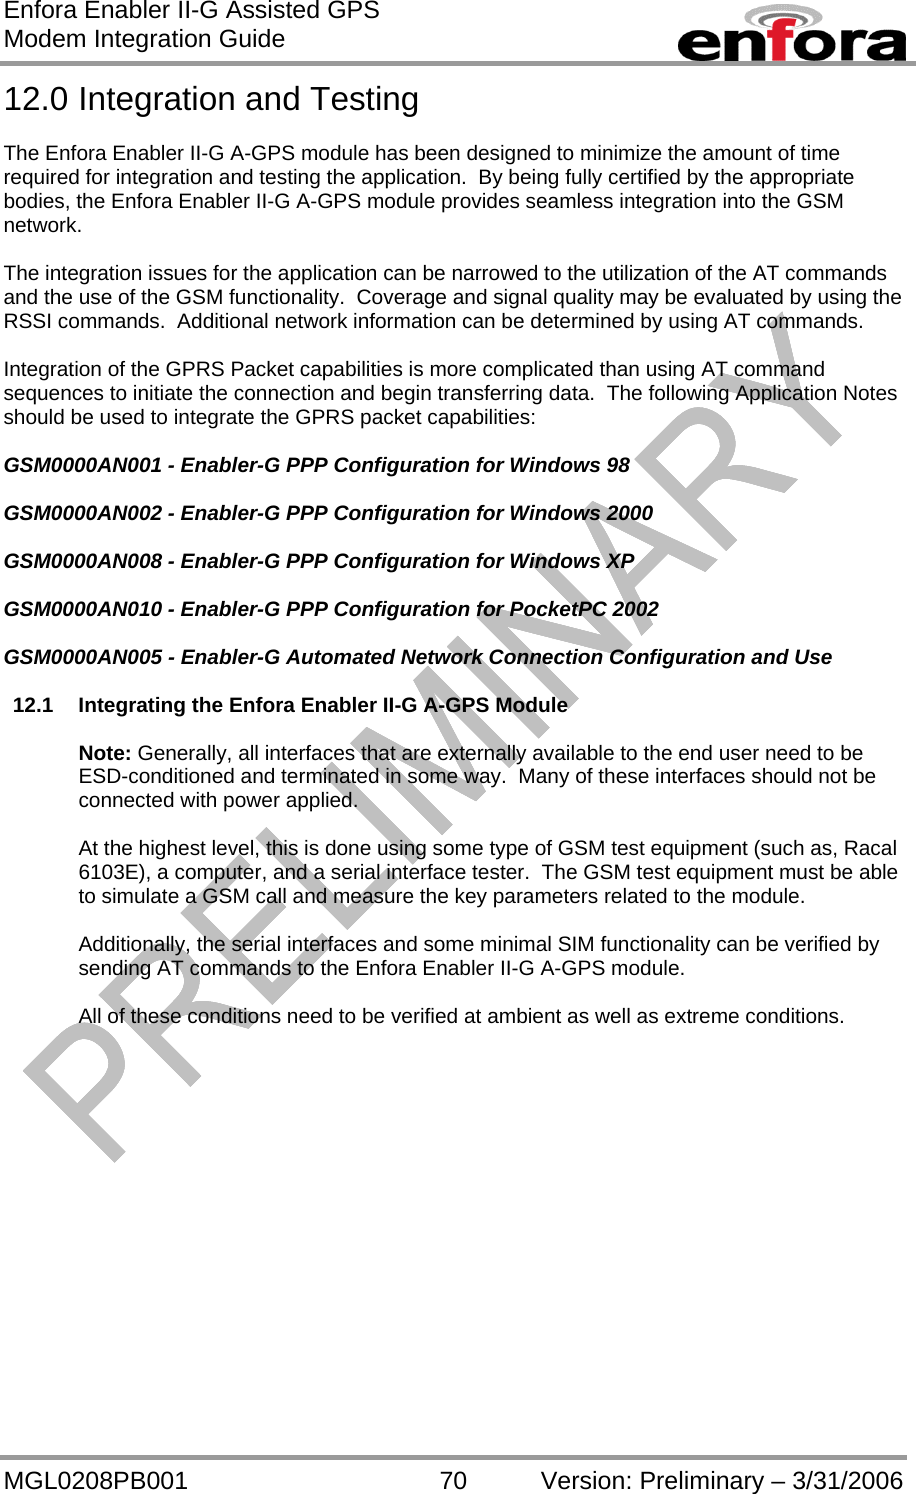 Enfora Enabler II-G Assisted GPS Modem Integration Guide MGL0208PB001 70 Version: Preliminary – 3/31/2006 12.0 Integration and Testing  The Enfora Enabler II-G A-GPS module has been designed to minimize the amount of time required for integration and testing the application.  By being fully certified by the appropriate bodies, the Enfora Enabler II-G A-GPS module provides seamless integration into the GSM network.  The integration issues for the application can be narrowed to the utilization of the AT commands and the use of the GSM functionality.  Coverage and signal quality may be evaluated by using the RSSI commands.  Additional network information can be determined by using AT commands.  Integration of the GPRS Packet capabilities is more complicated than using AT command sequences to initiate the connection and begin transferring data.  The following Application Notes should be used to integrate the GPRS packet capabilities:  GSM0000AN001 - Enabler-G PPP Configuration for Windows 98  GSM0000AN002 - Enabler-G PPP Configuration for Windows 2000  GSM0000AN008 - Enabler-G PPP Configuration for Windows XP  GSM0000AN010 - Enabler-G PPP Configuration for PocketPC 2002  GSM0000AN005 - Enabler-G Automated Network Connection Configuration and Use  12.1  Integrating the Enfora Enabler II-G A-GPS Module  Note: Generally, all interfaces that are externally available to the end user need to be ESD-conditioned and terminated in some way.  Many of these interfaces should not be connected with power applied.  At the highest level, this is done using some type of GSM test equipment (such as, Racal 6103E), a computer, and a serial interface tester.  The GSM test equipment must be able to simulate a GSM call and measure the key parameters related to the module.  Additionally, the serial interfaces and some minimal SIM functionality can be verified by sending AT commands to the Enfora Enabler II-G A-GPS module.  All of these conditions need to be verified at ambient as well as extreme conditions.  